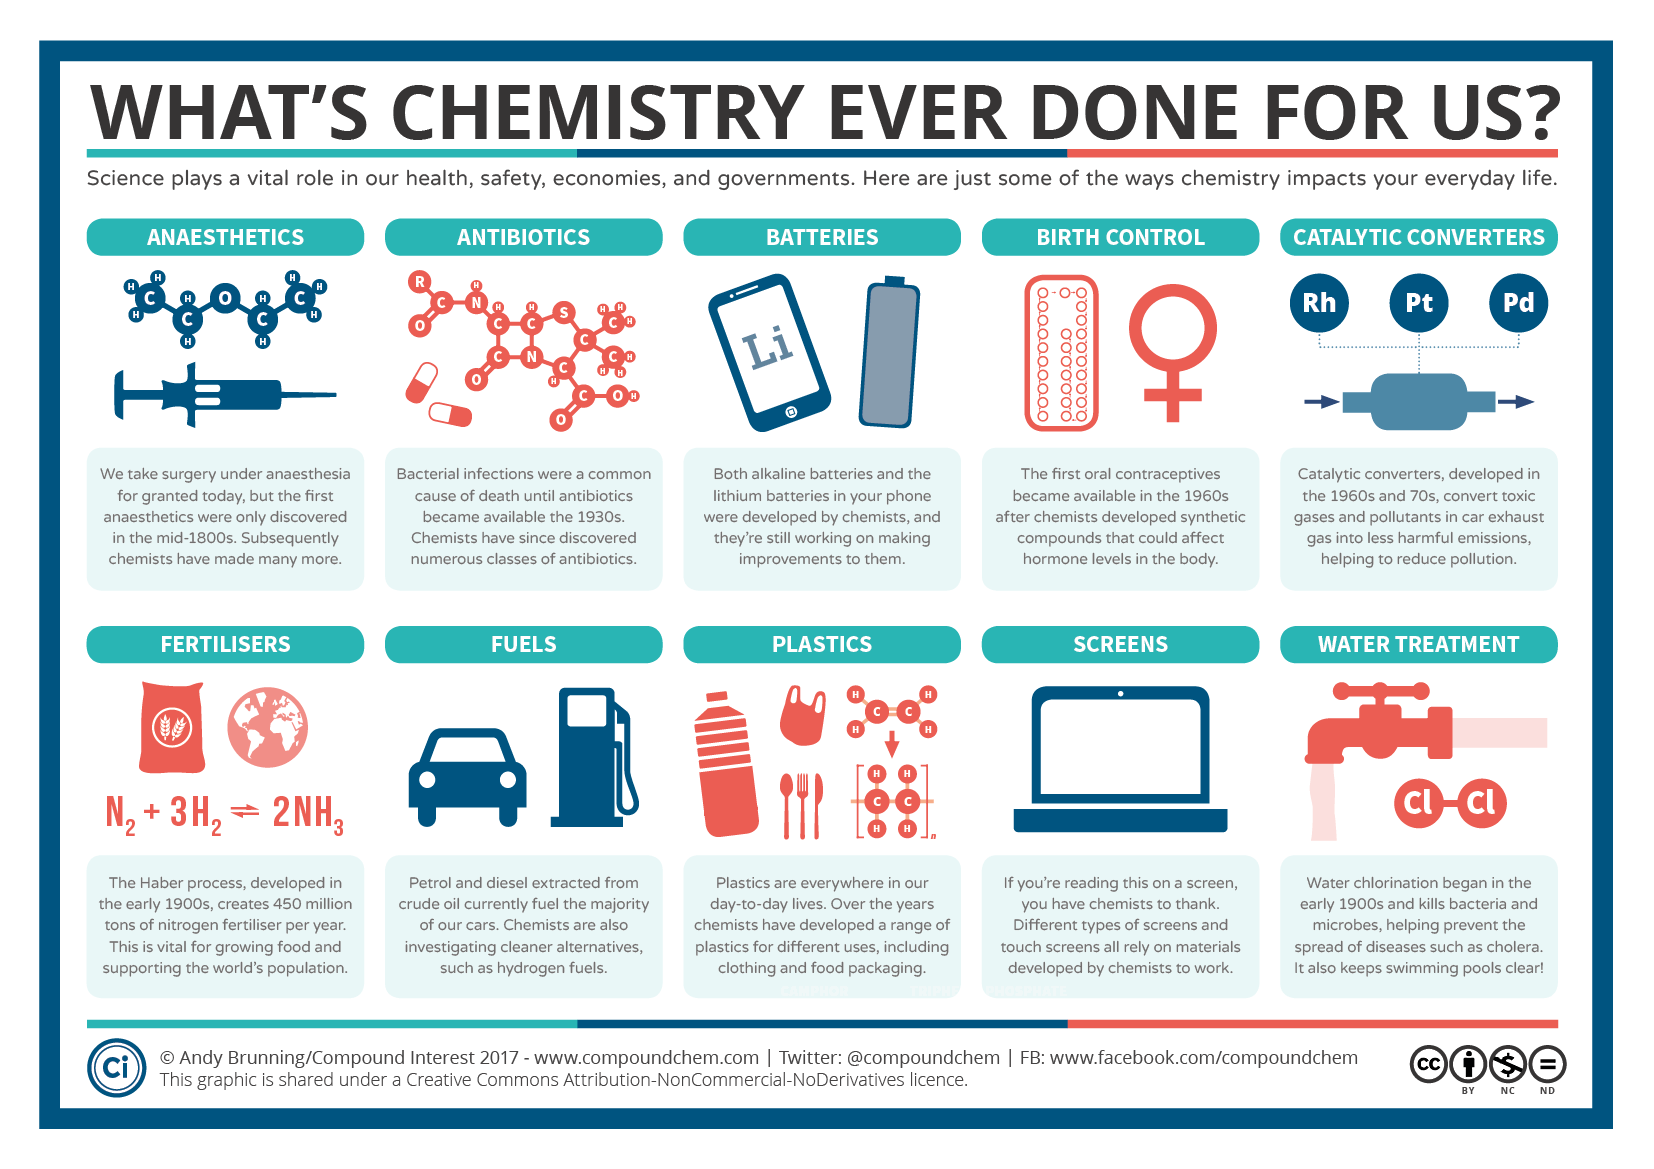 Chemical compounds in everyday life: anesthetics, antibiotics, batteries, birth control, catalytic converters, fertilizers, fuels, plastics, screens, water treatment.